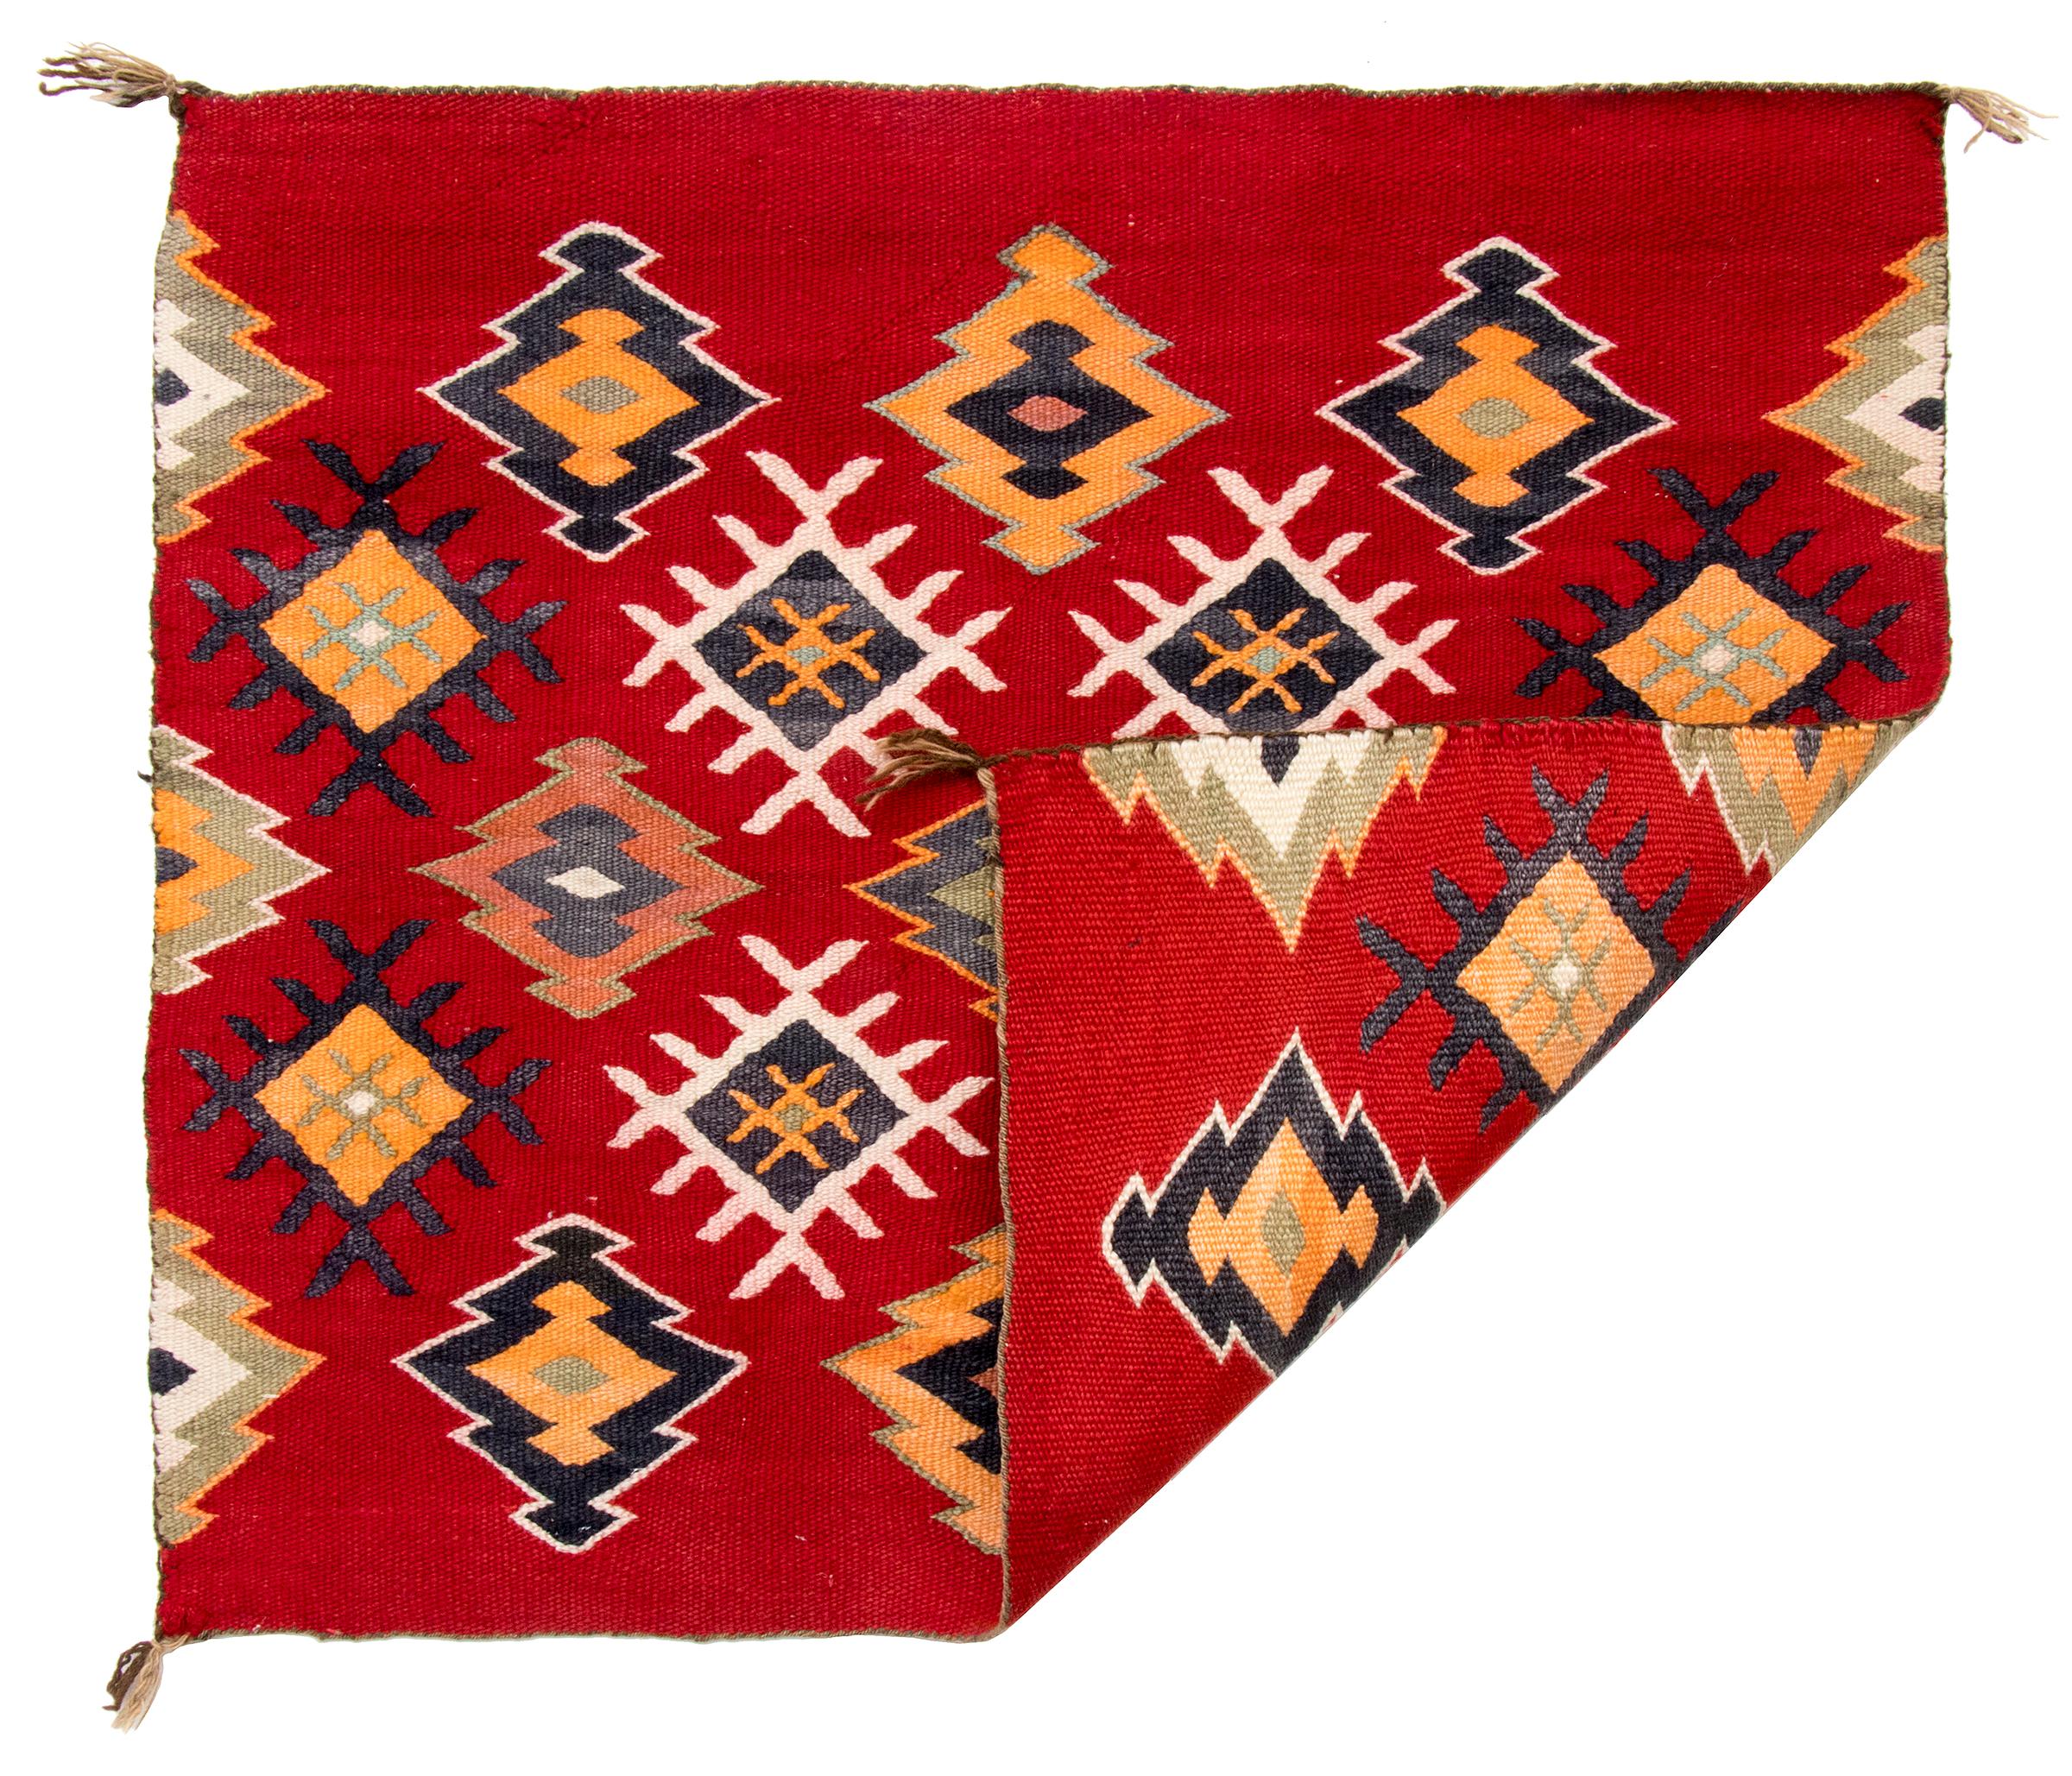 Vintage early 1900s Navajo single saddle blanket with diamond pattern, hand woven of native hand spun wool in red, yellow, orange, black and white. 
The Diné (Navajo) peoples are a Native American Indian tribal group indigenous to the area now known